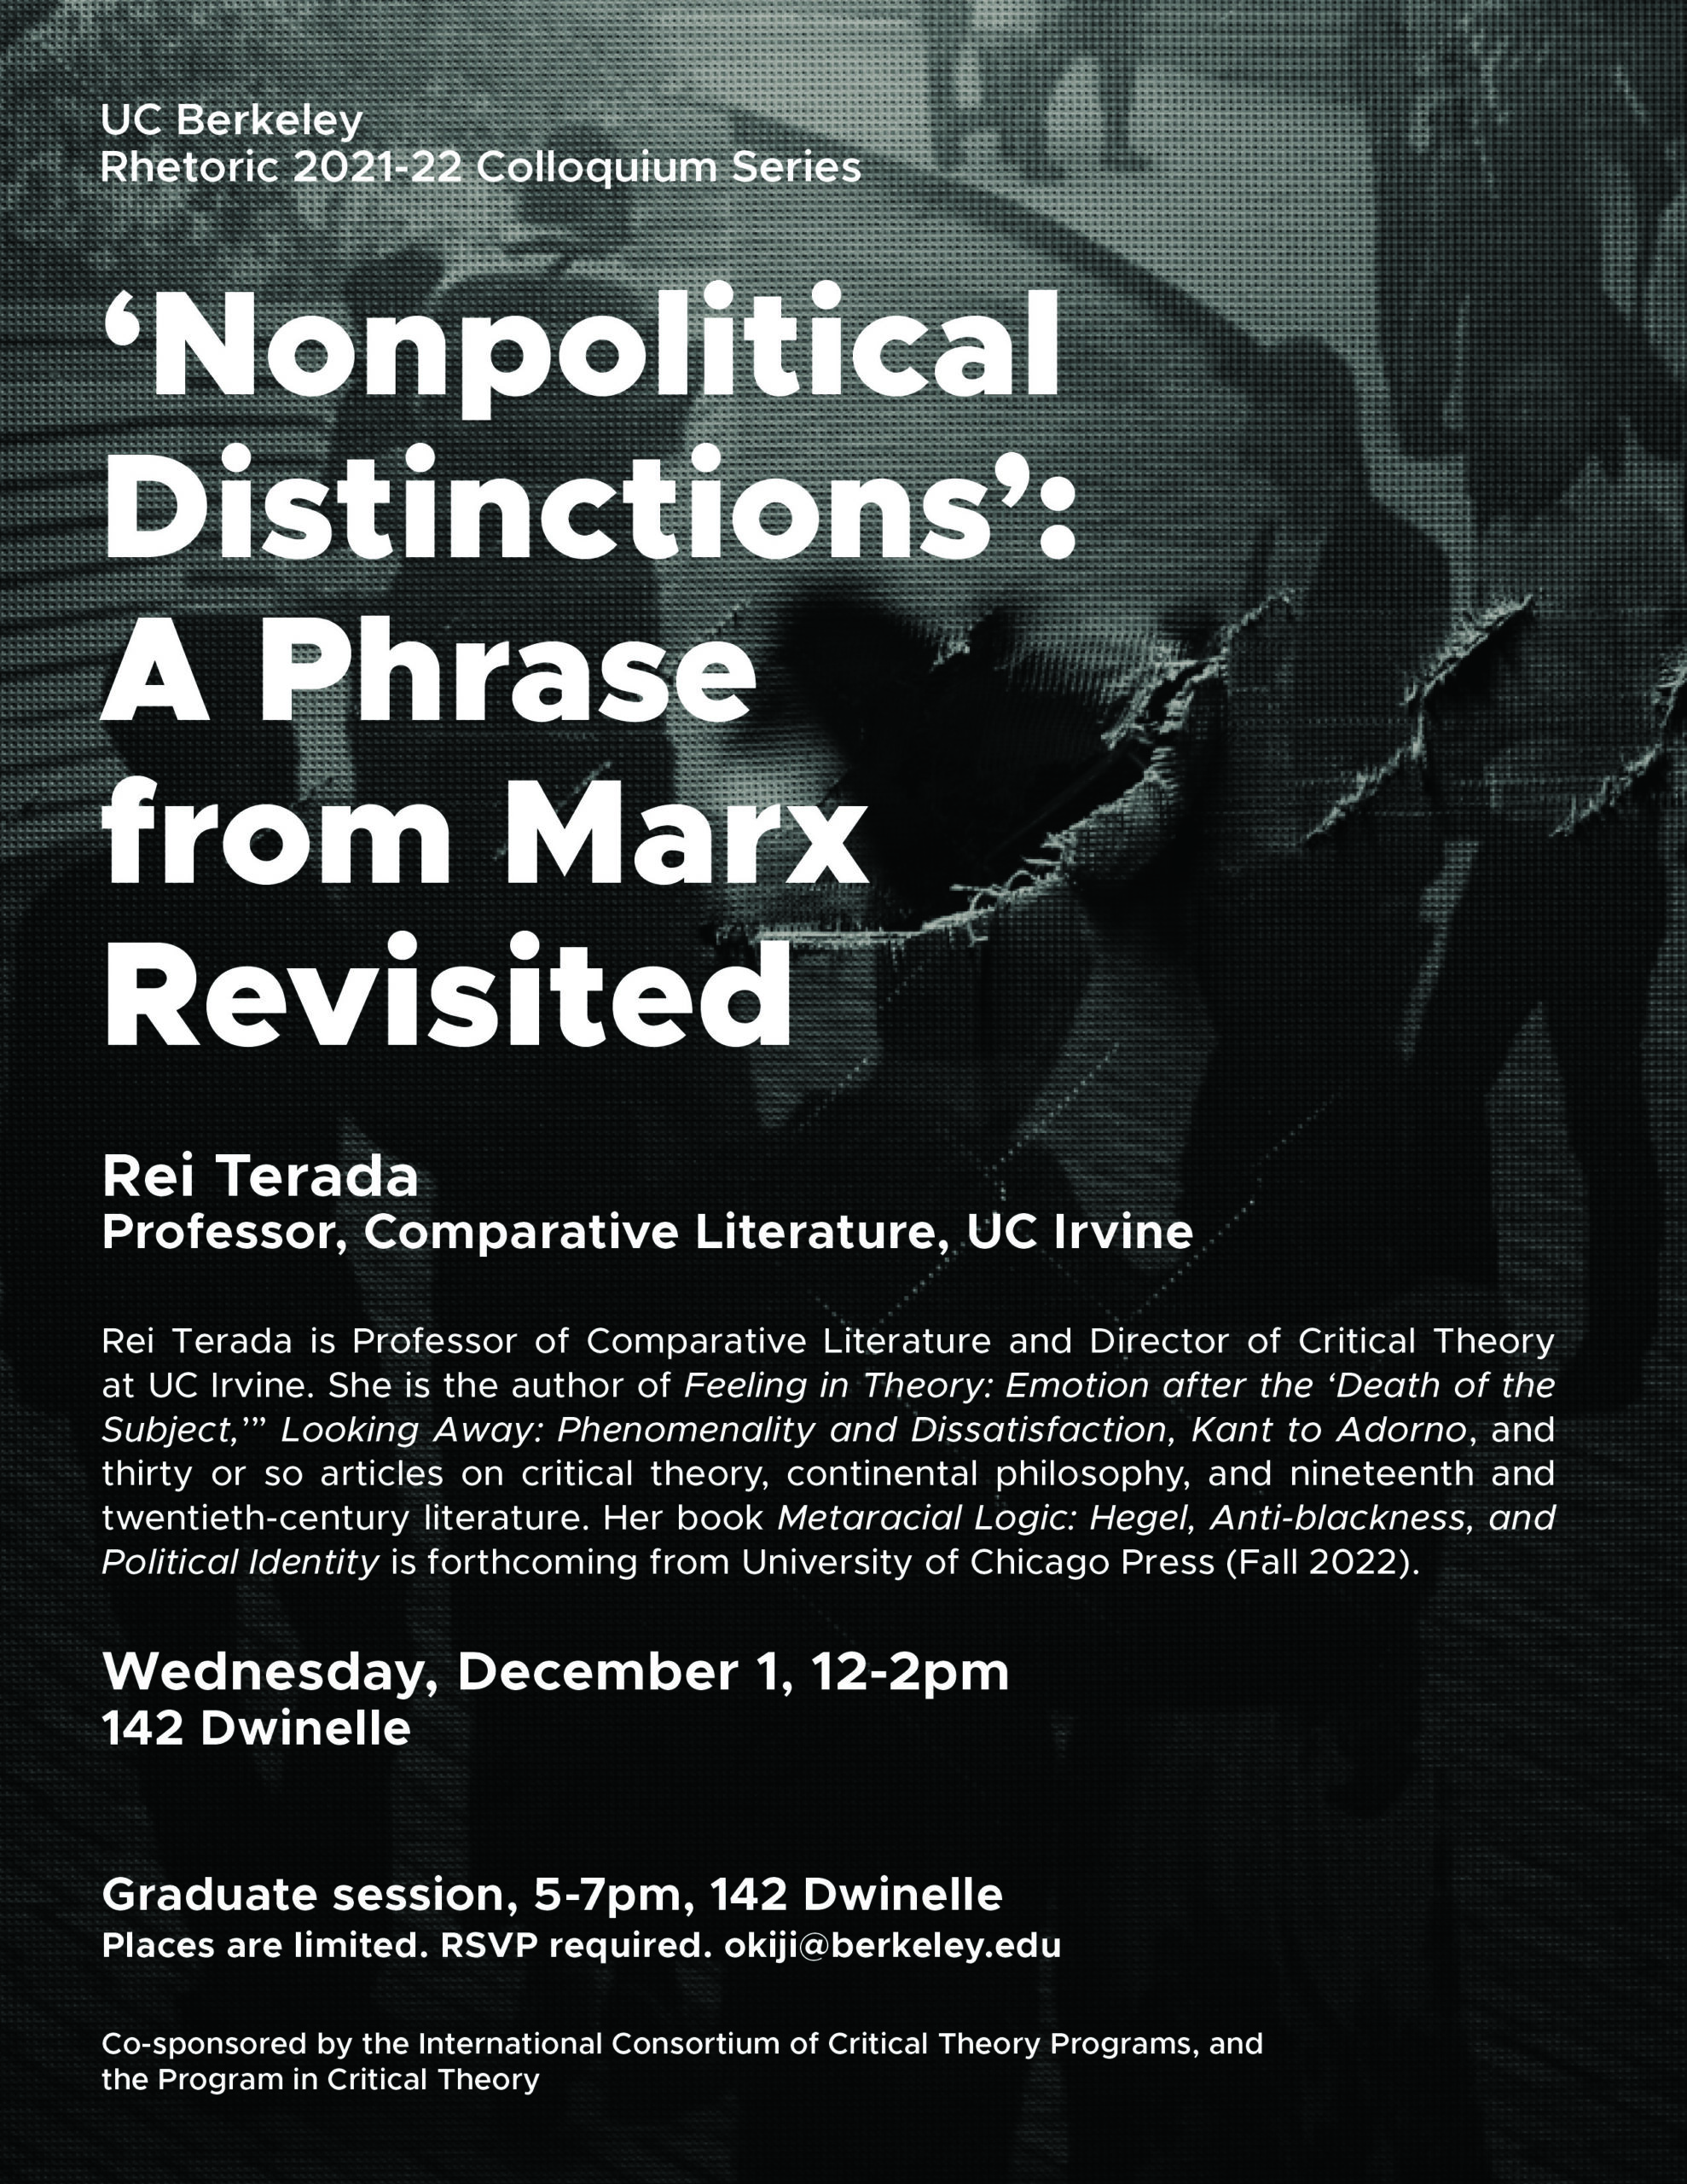 ‘Nonpolitical Distinctions’: A Phrase from Marx Revisited with Rei Terada